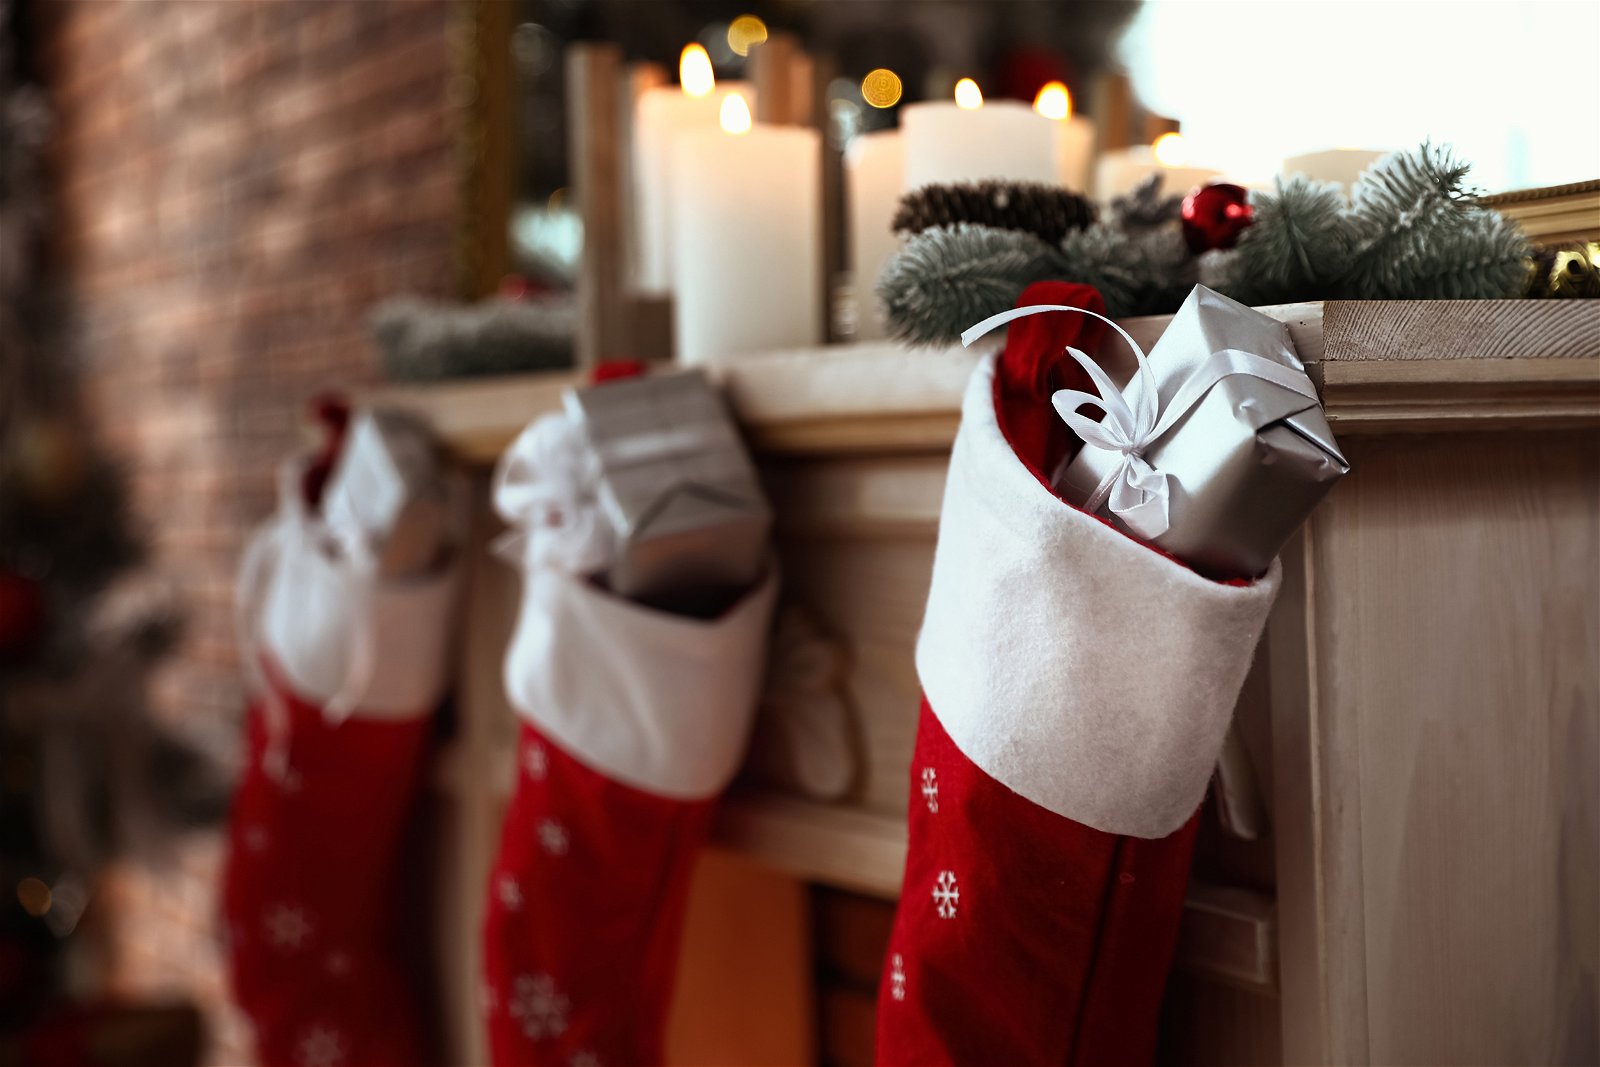 Christmas stockings with gifts